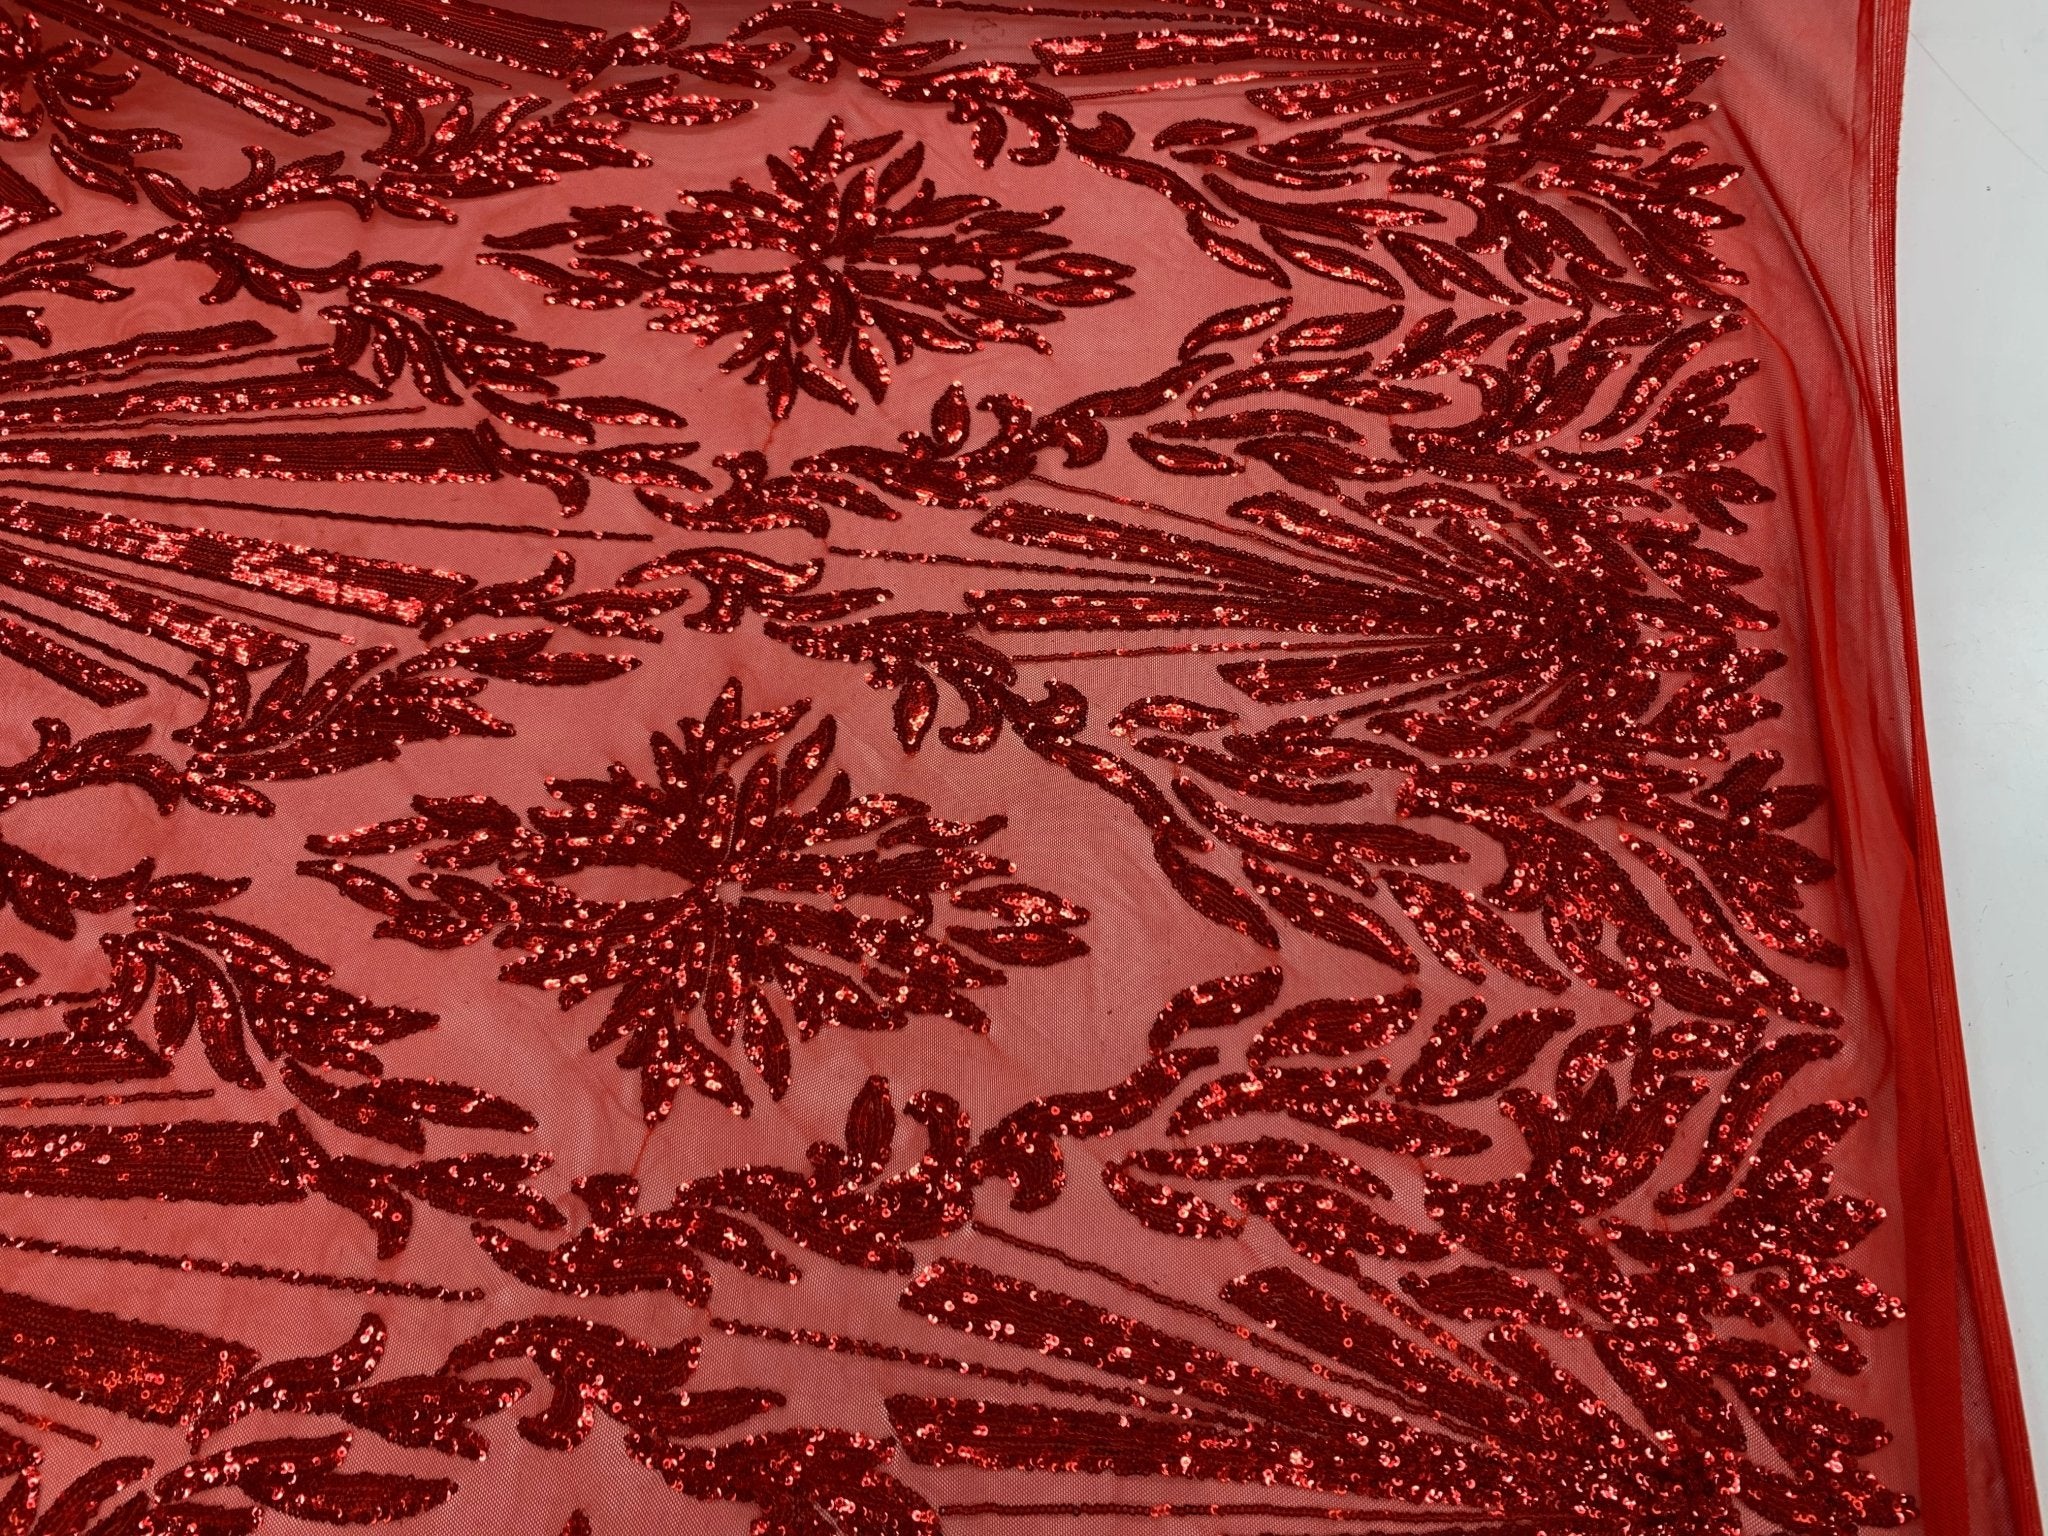 Red Luxury Stretch Sequin Bridal Embroidery on Red Mesh Lace FabricICEFABRICICE FABRICSRedRed Luxury Stretch Sequin Bridal Embroidery on Red Mesh Lace Fabric ICEFABRIC